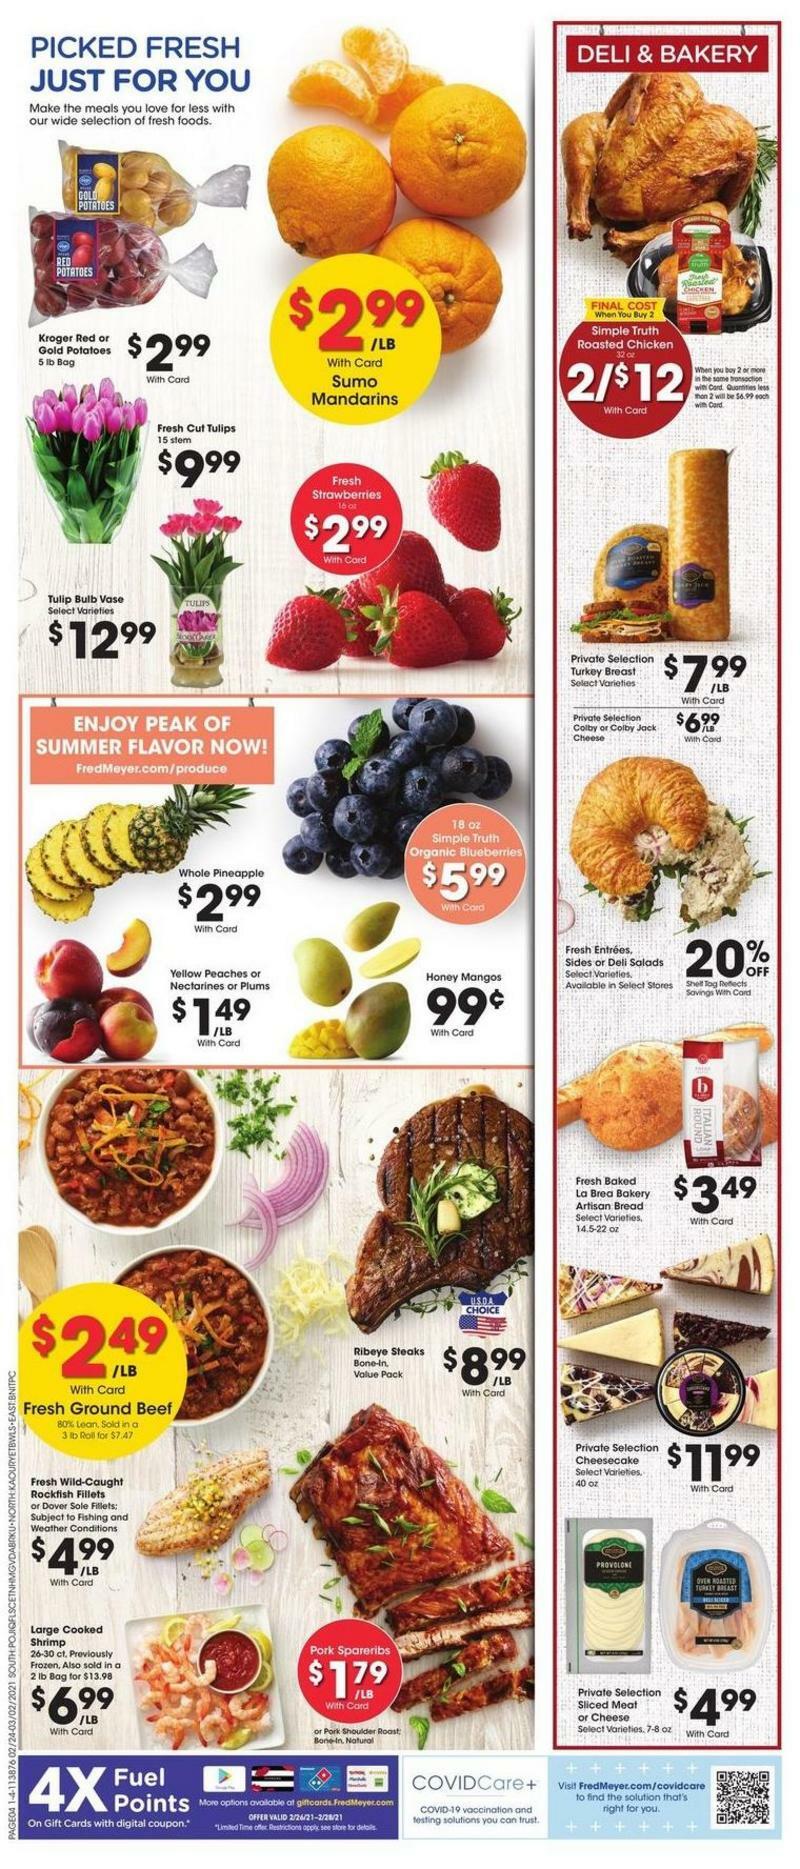 Fred Meyer Weekly Ad from February 24